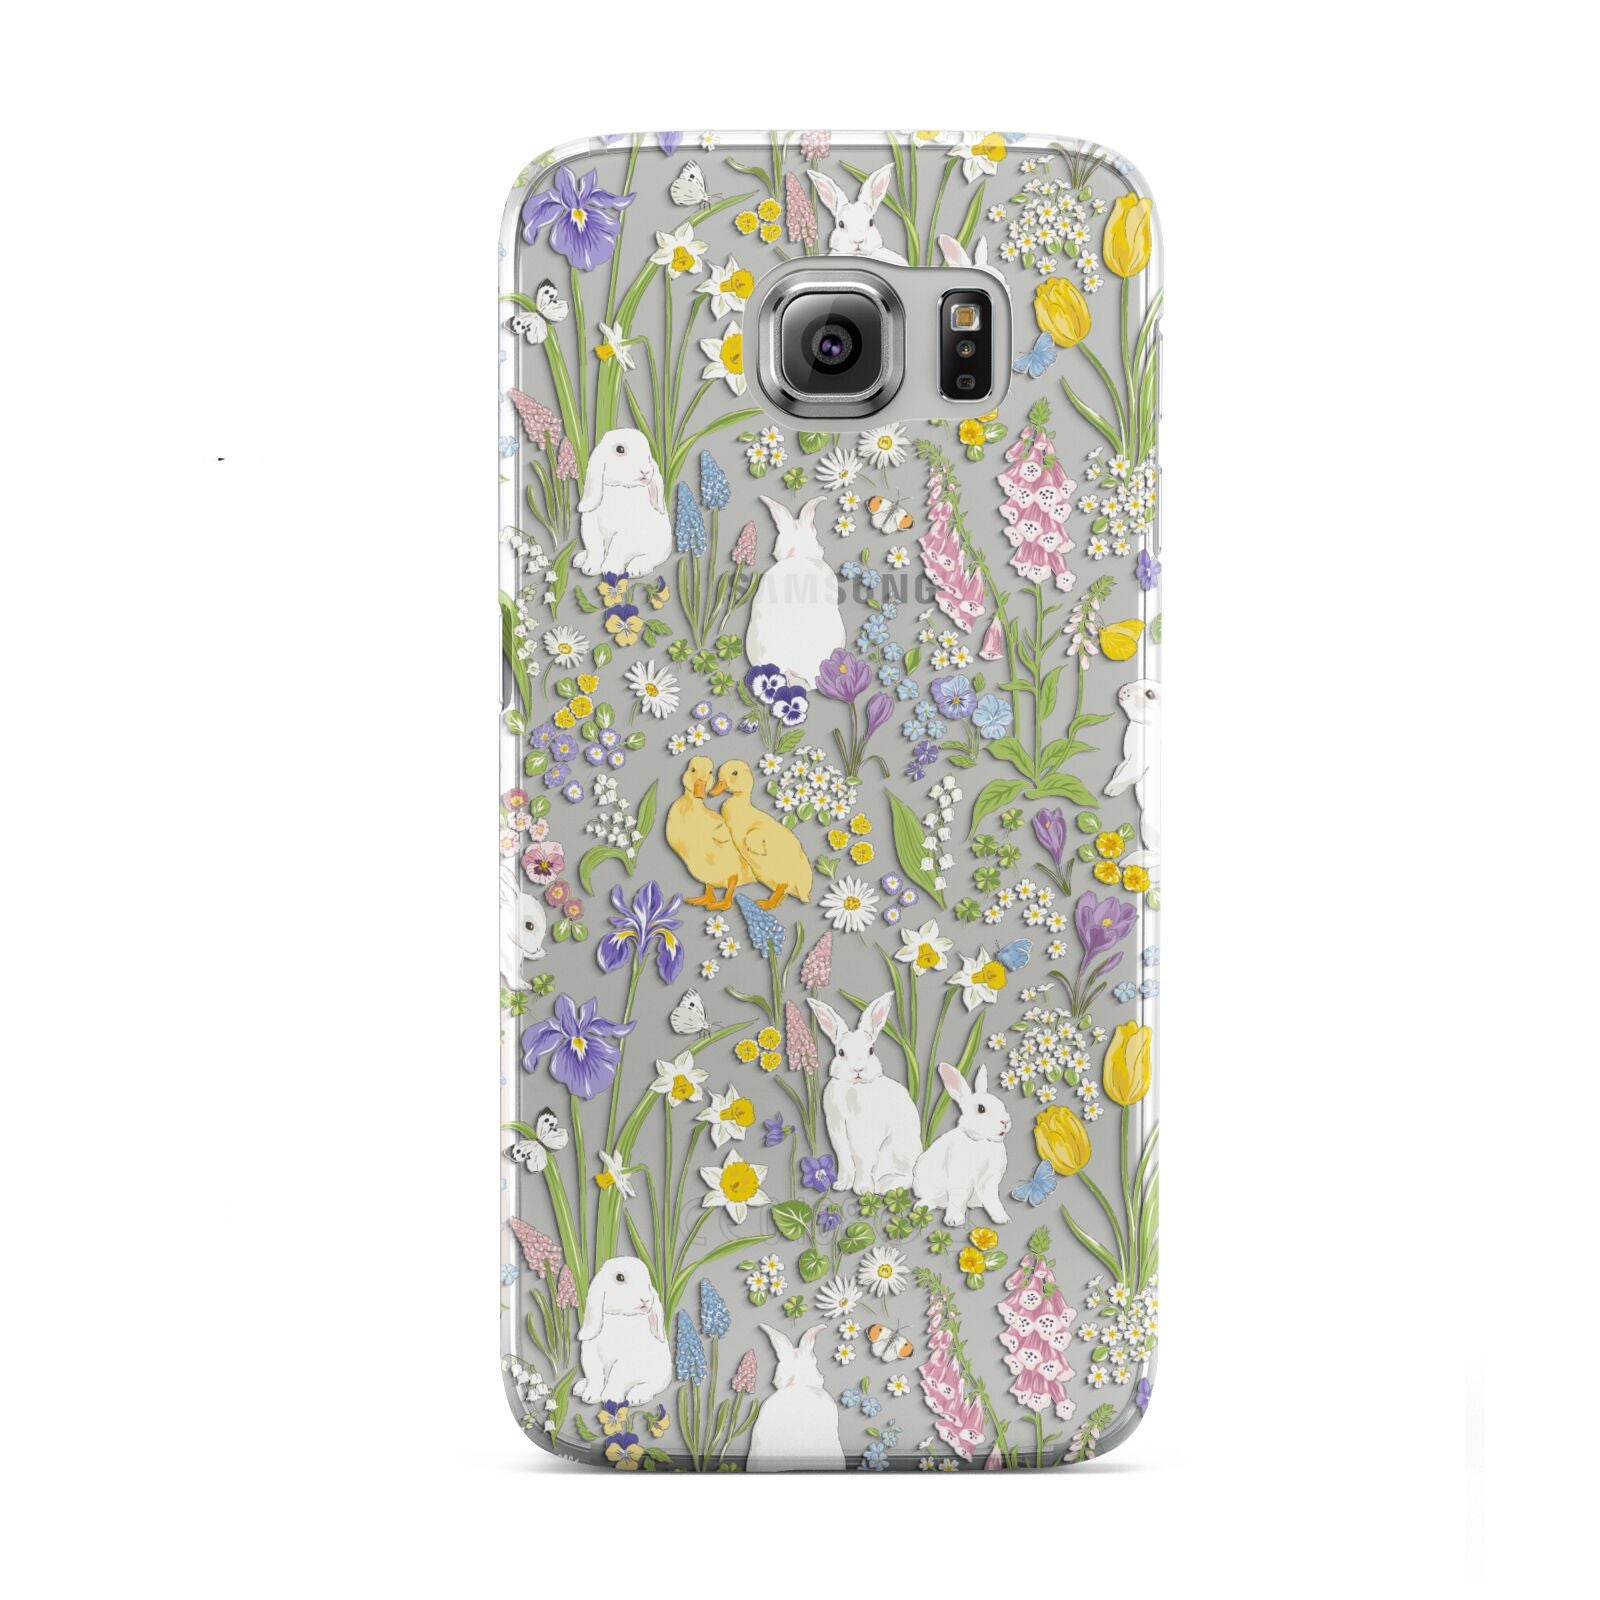 Easter Samsung Galaxy S6 Case